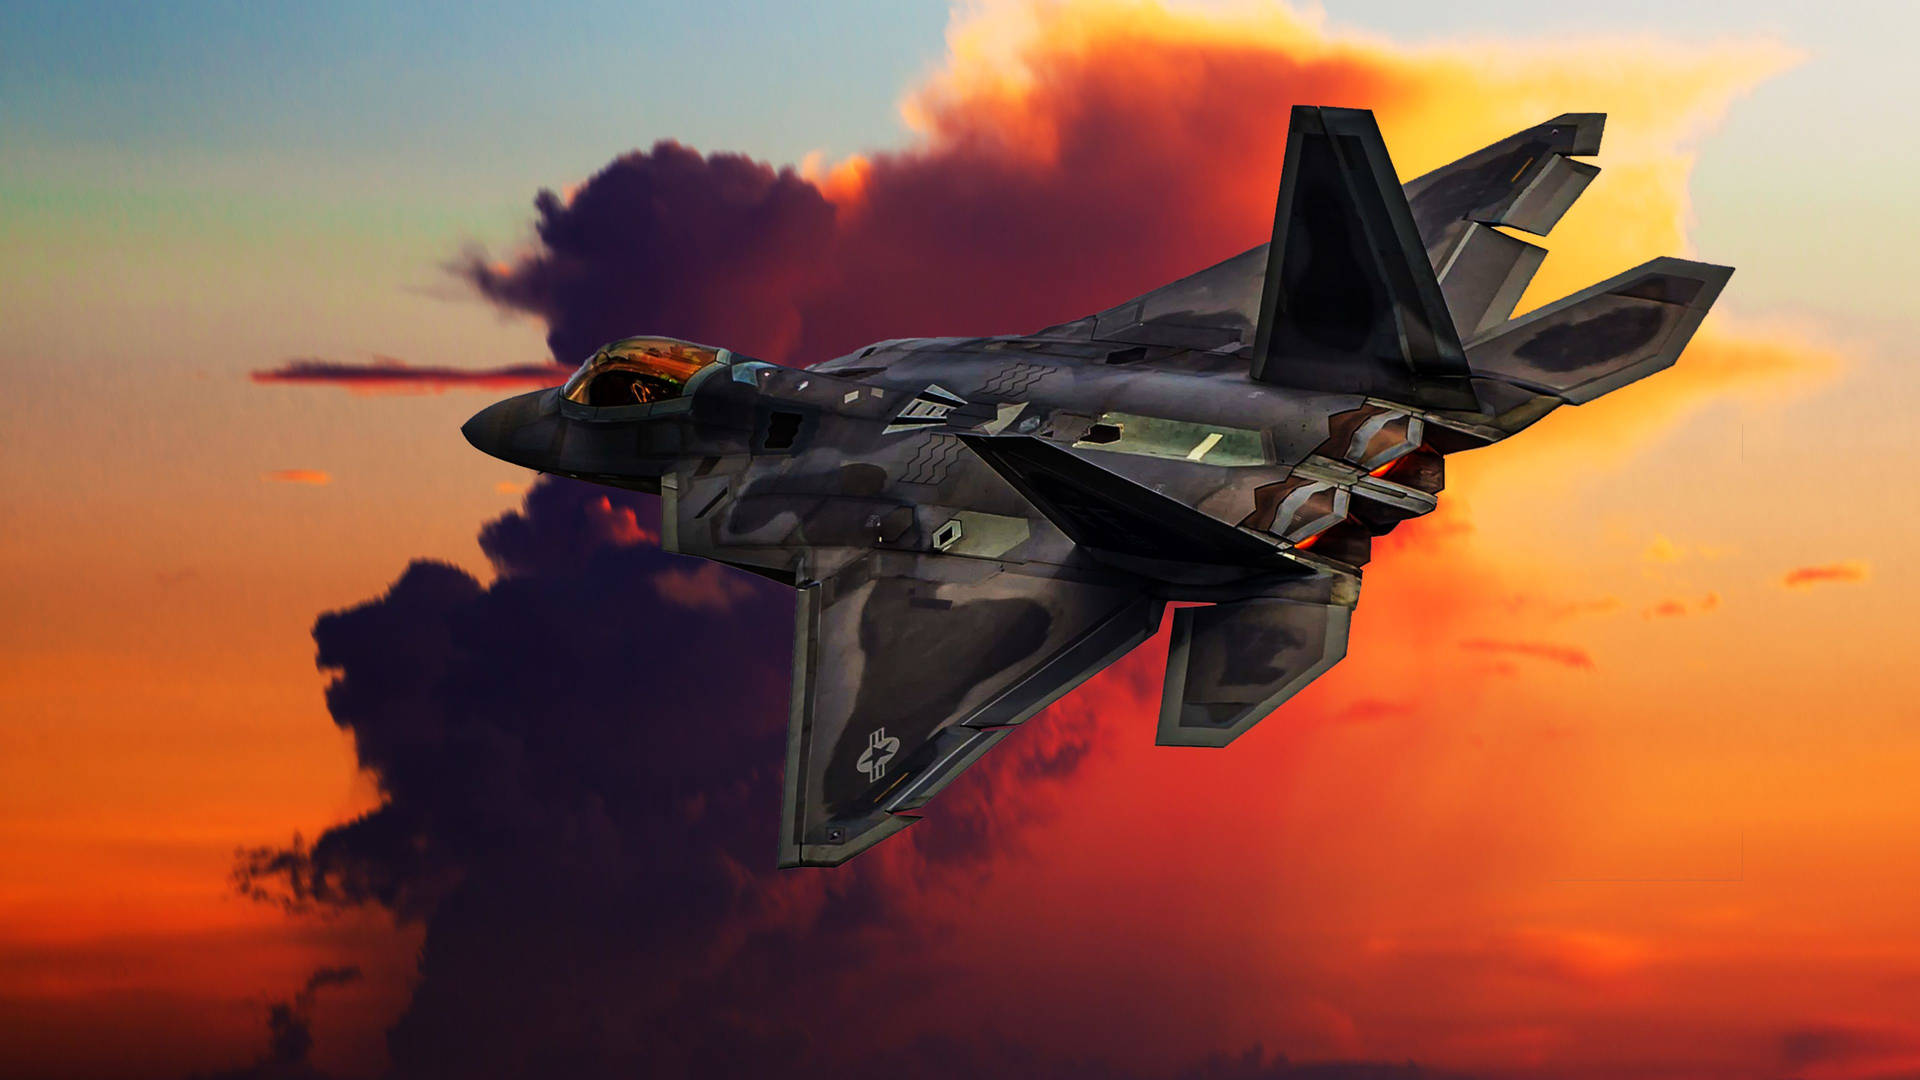 A 4K fighter jet soars above the clouds Wallpaper